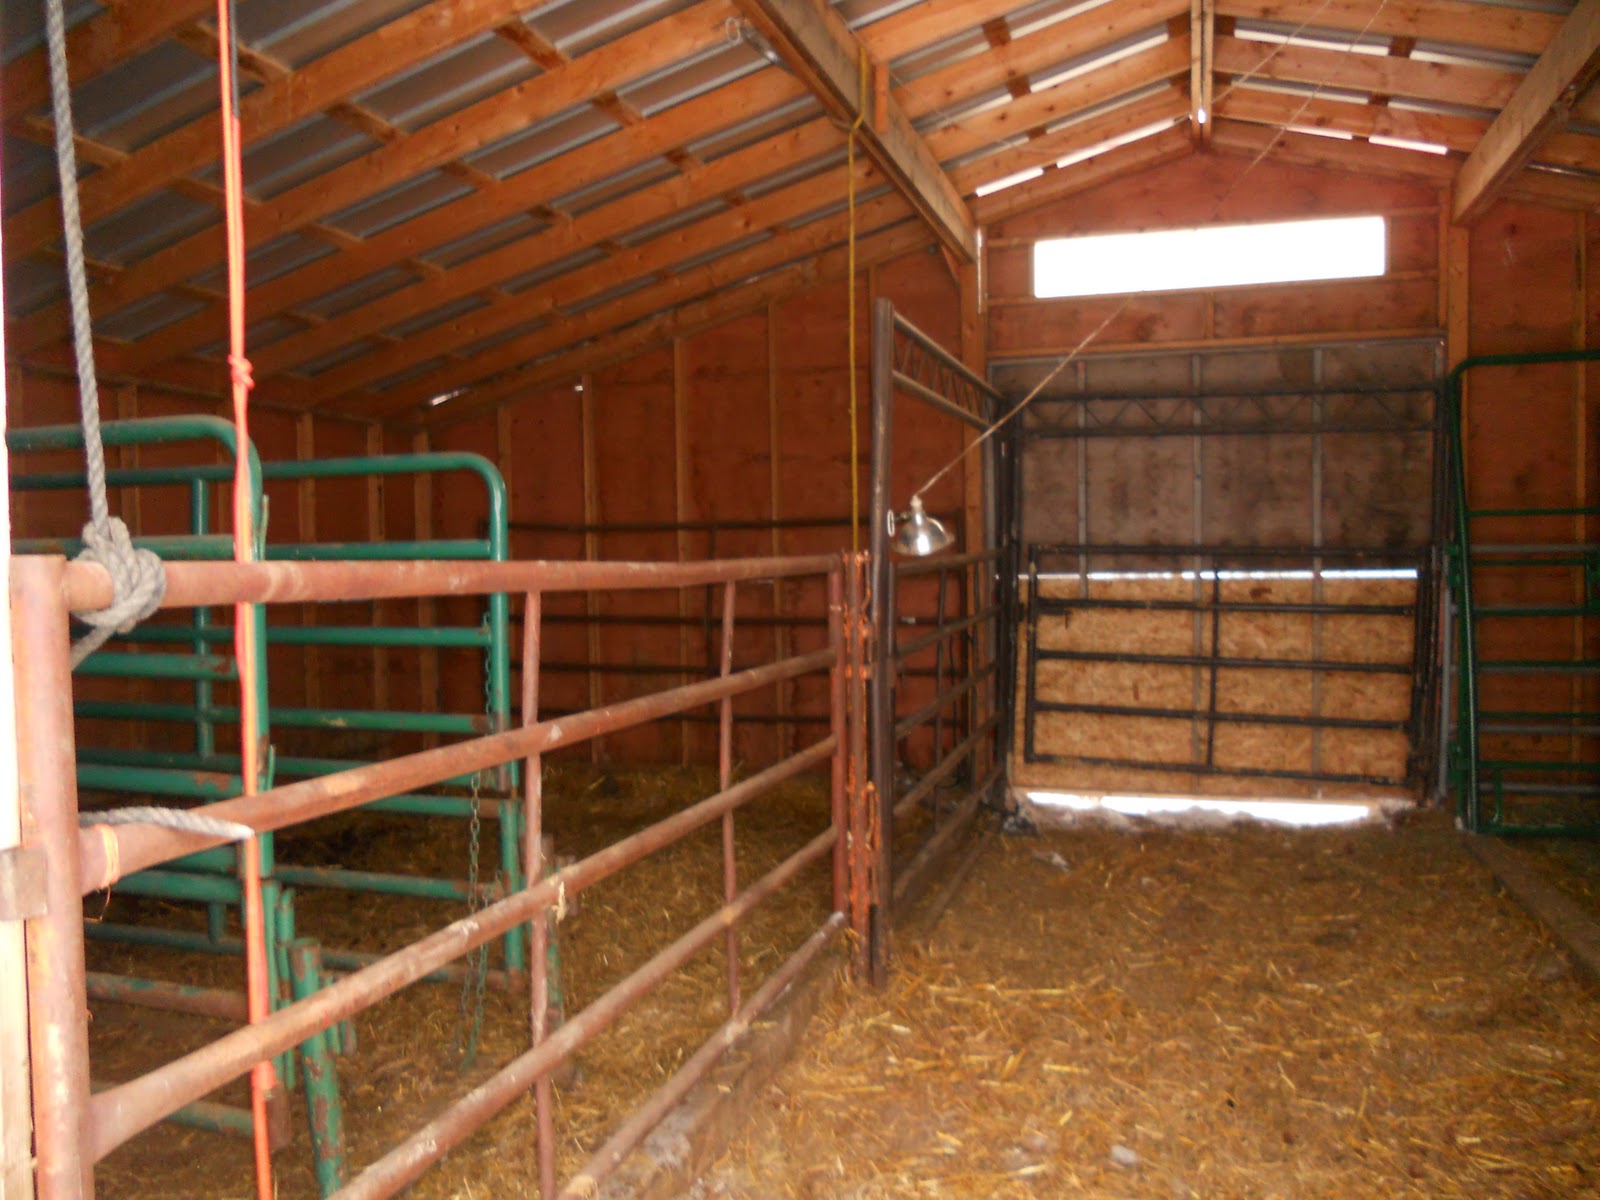 94+ Cattle Barn Plans - 12x24 Cattle Shed Plans, Looking ...